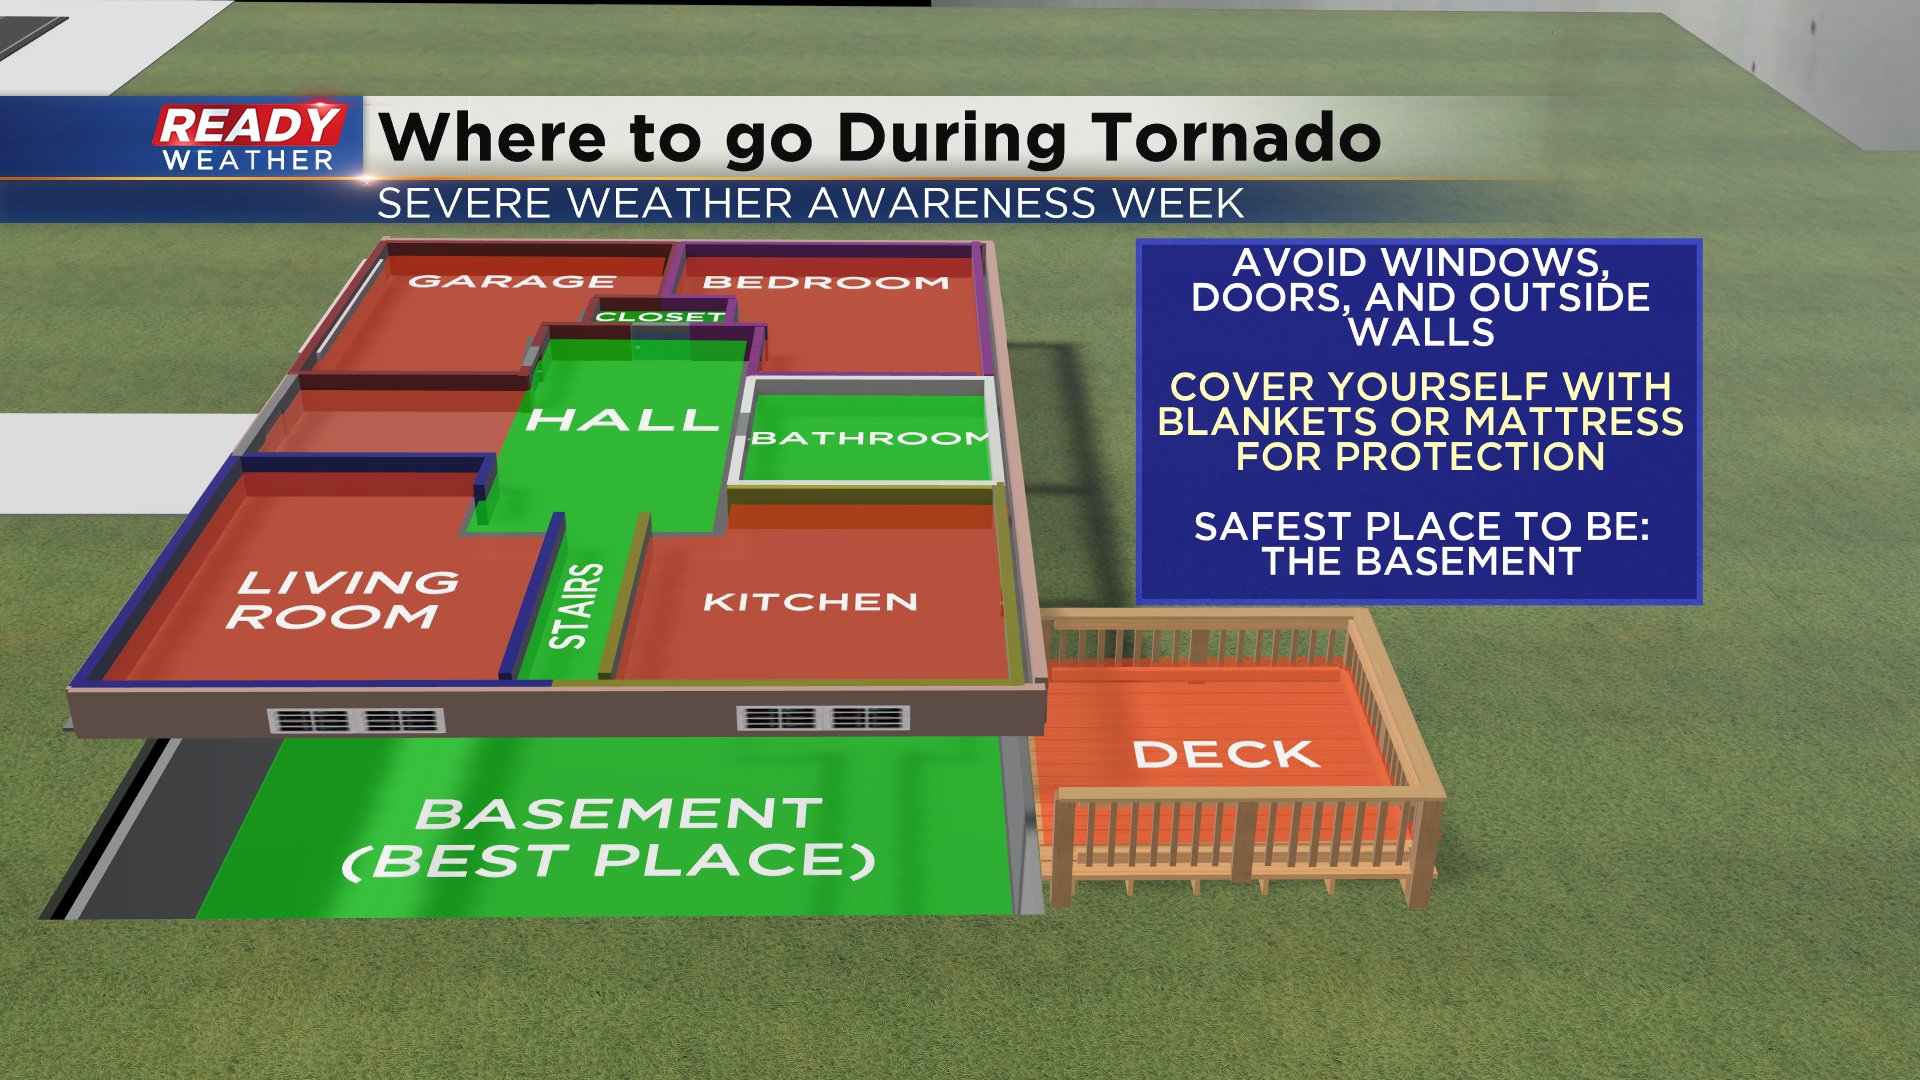 Virtual tornado drill day during Severe Weather Awareness Week